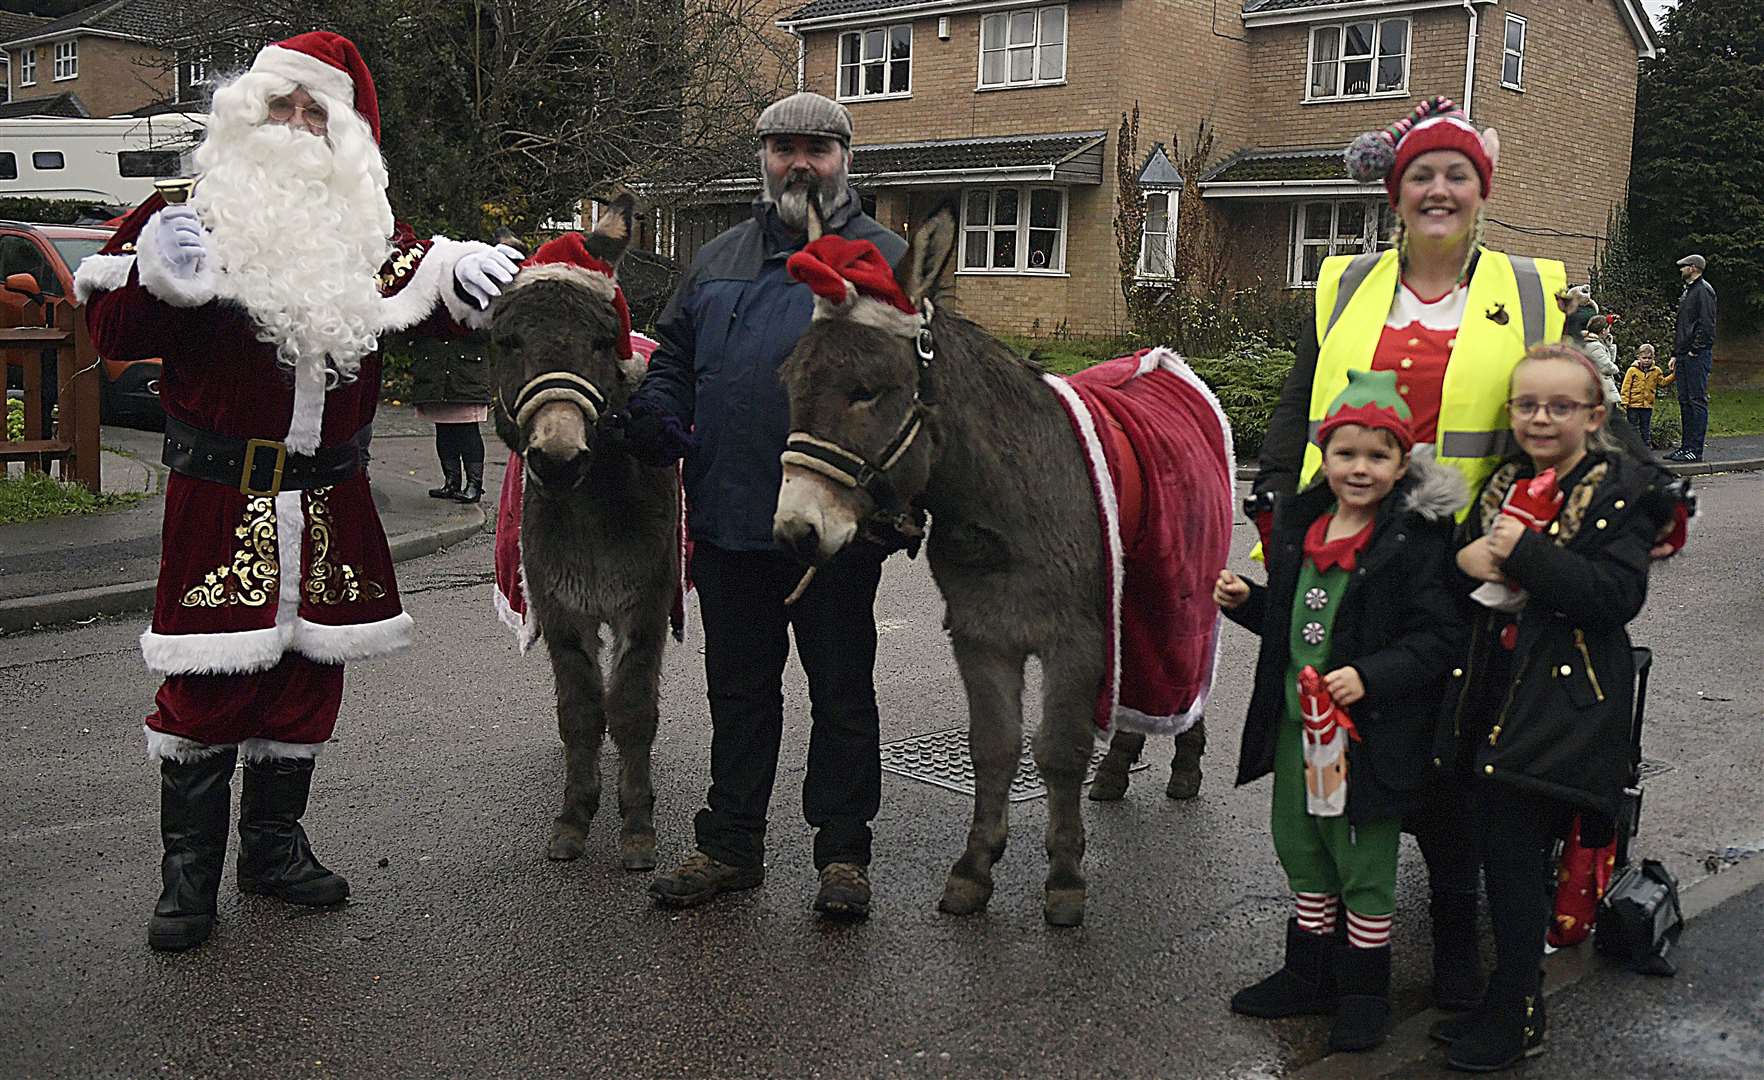 Father Christmas, accompanied by two donkeys, visited Fielding Drive. Picture: Barry Goodwin